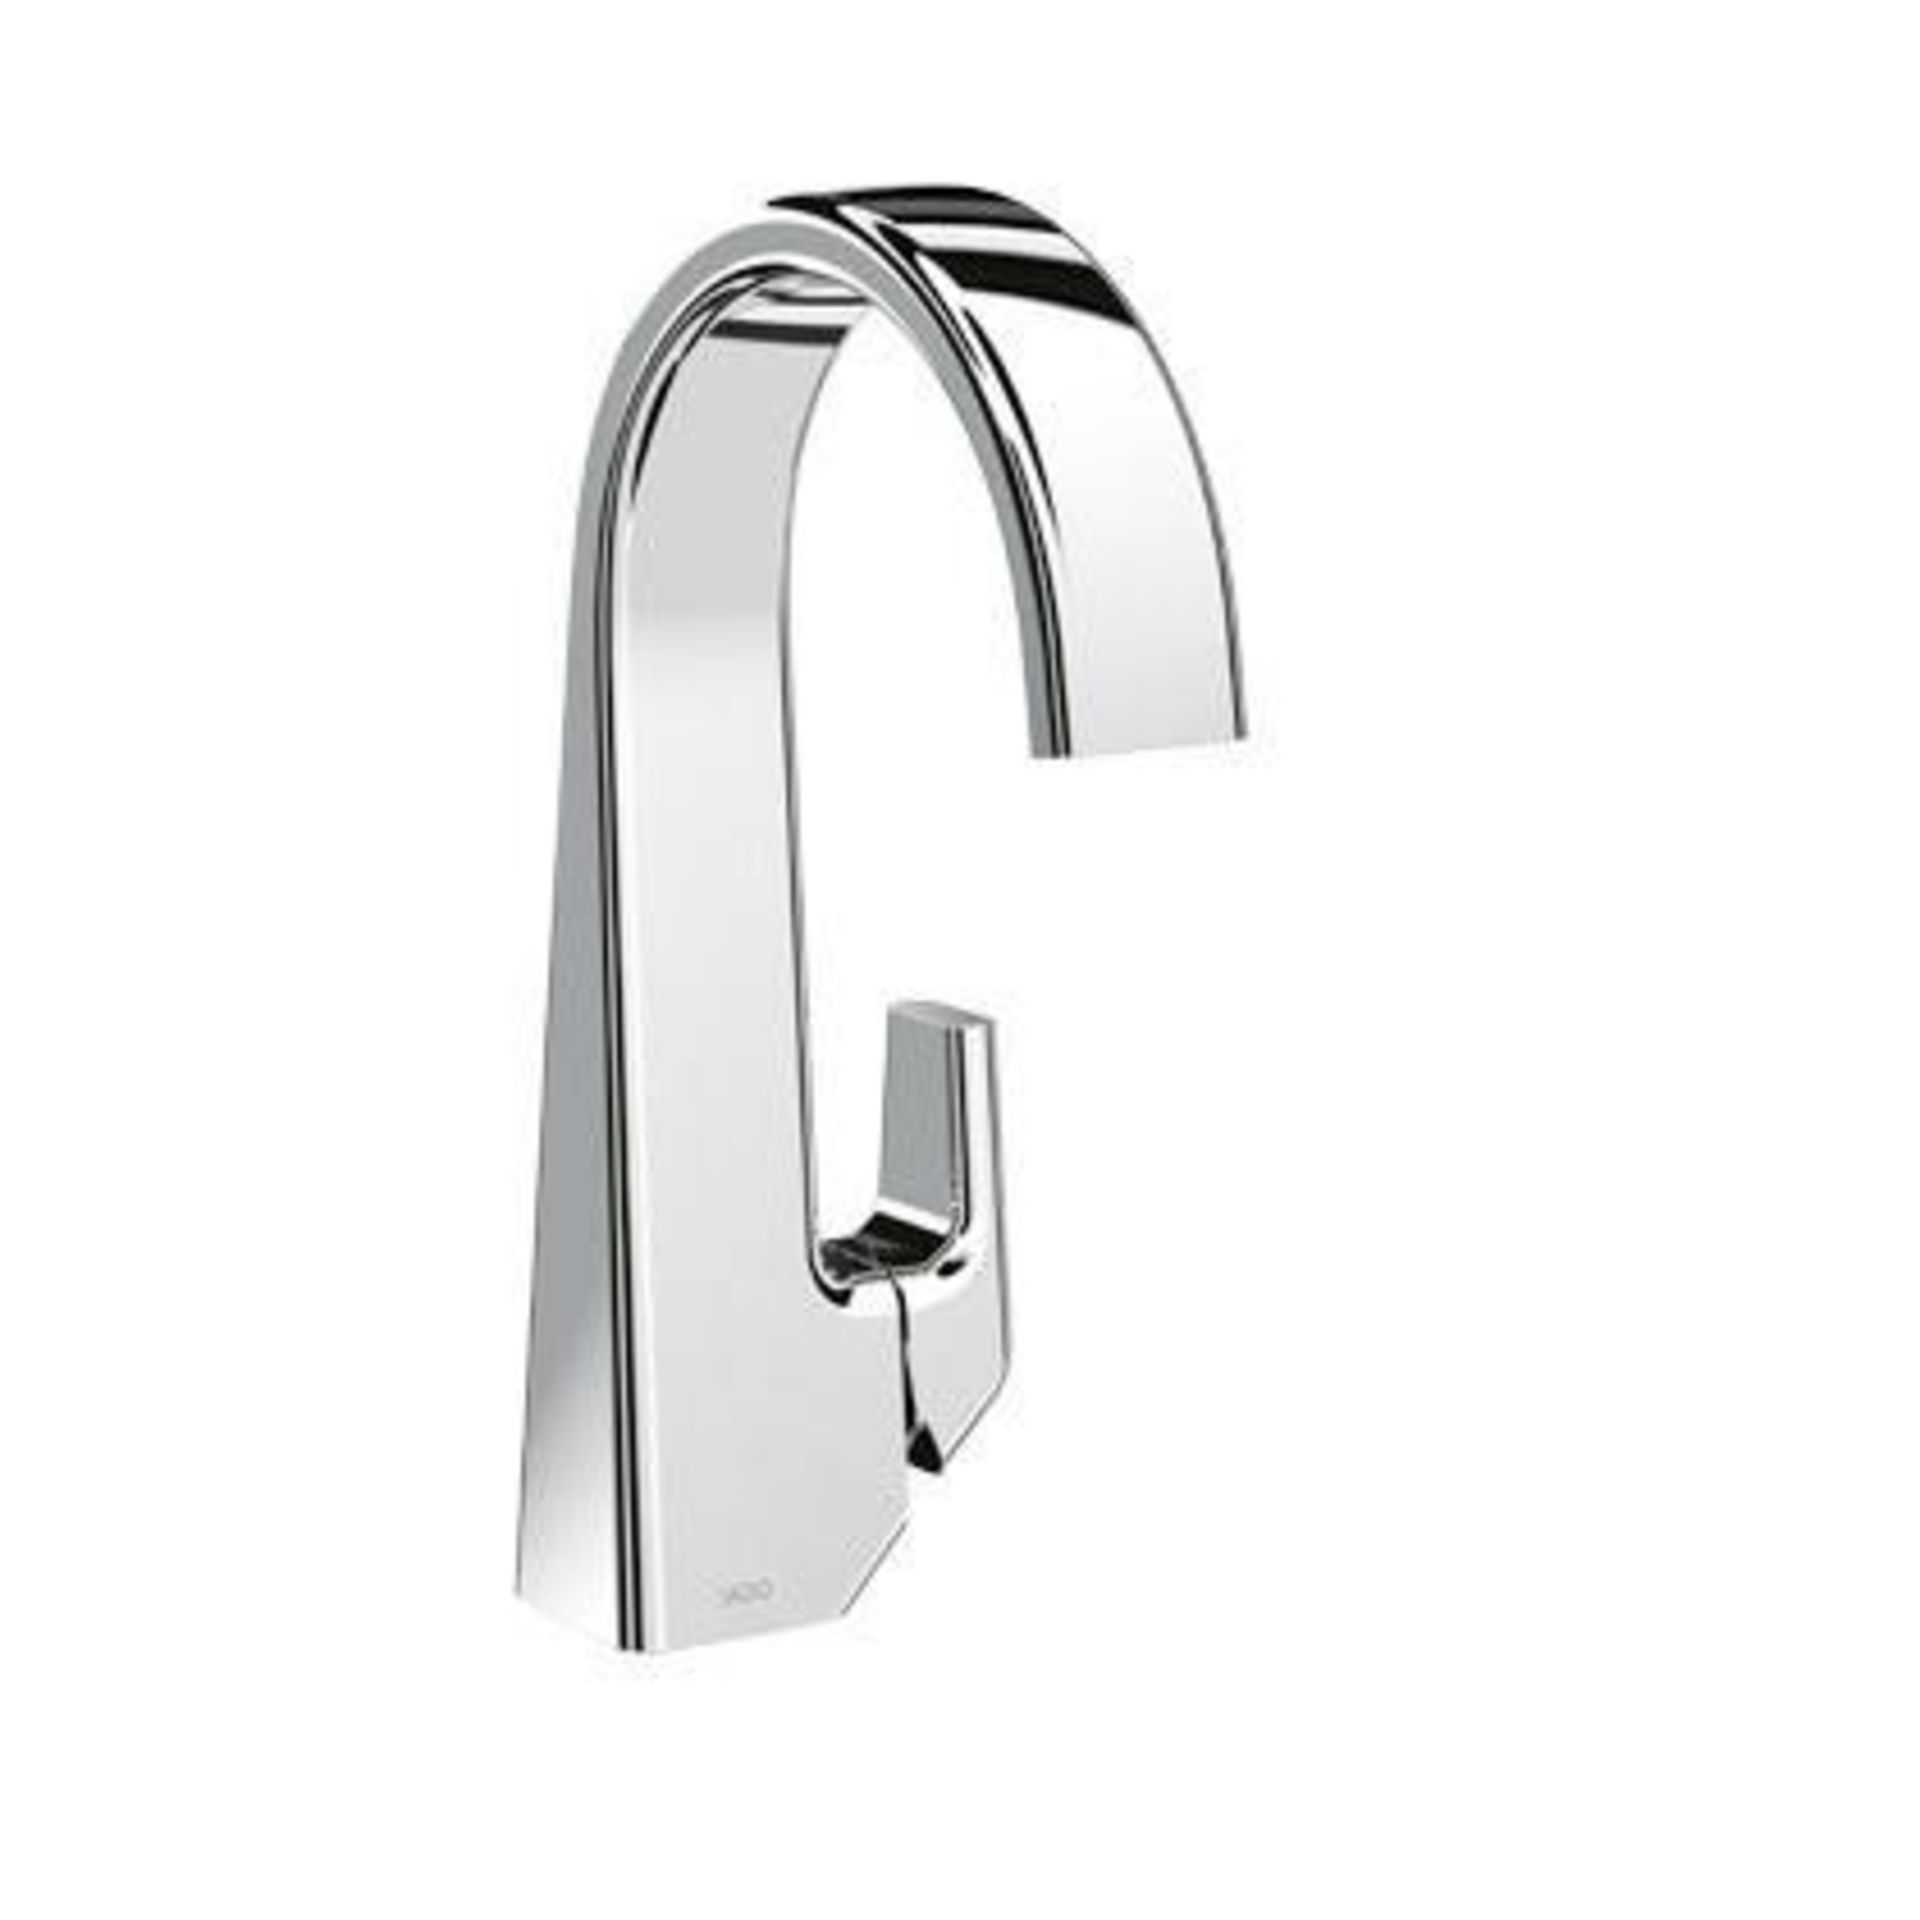 1 x Ideal Standard JADO "Jes" Single Lever Basin Mixer Without Waste Set (H4485AA) - Image 2 of 7